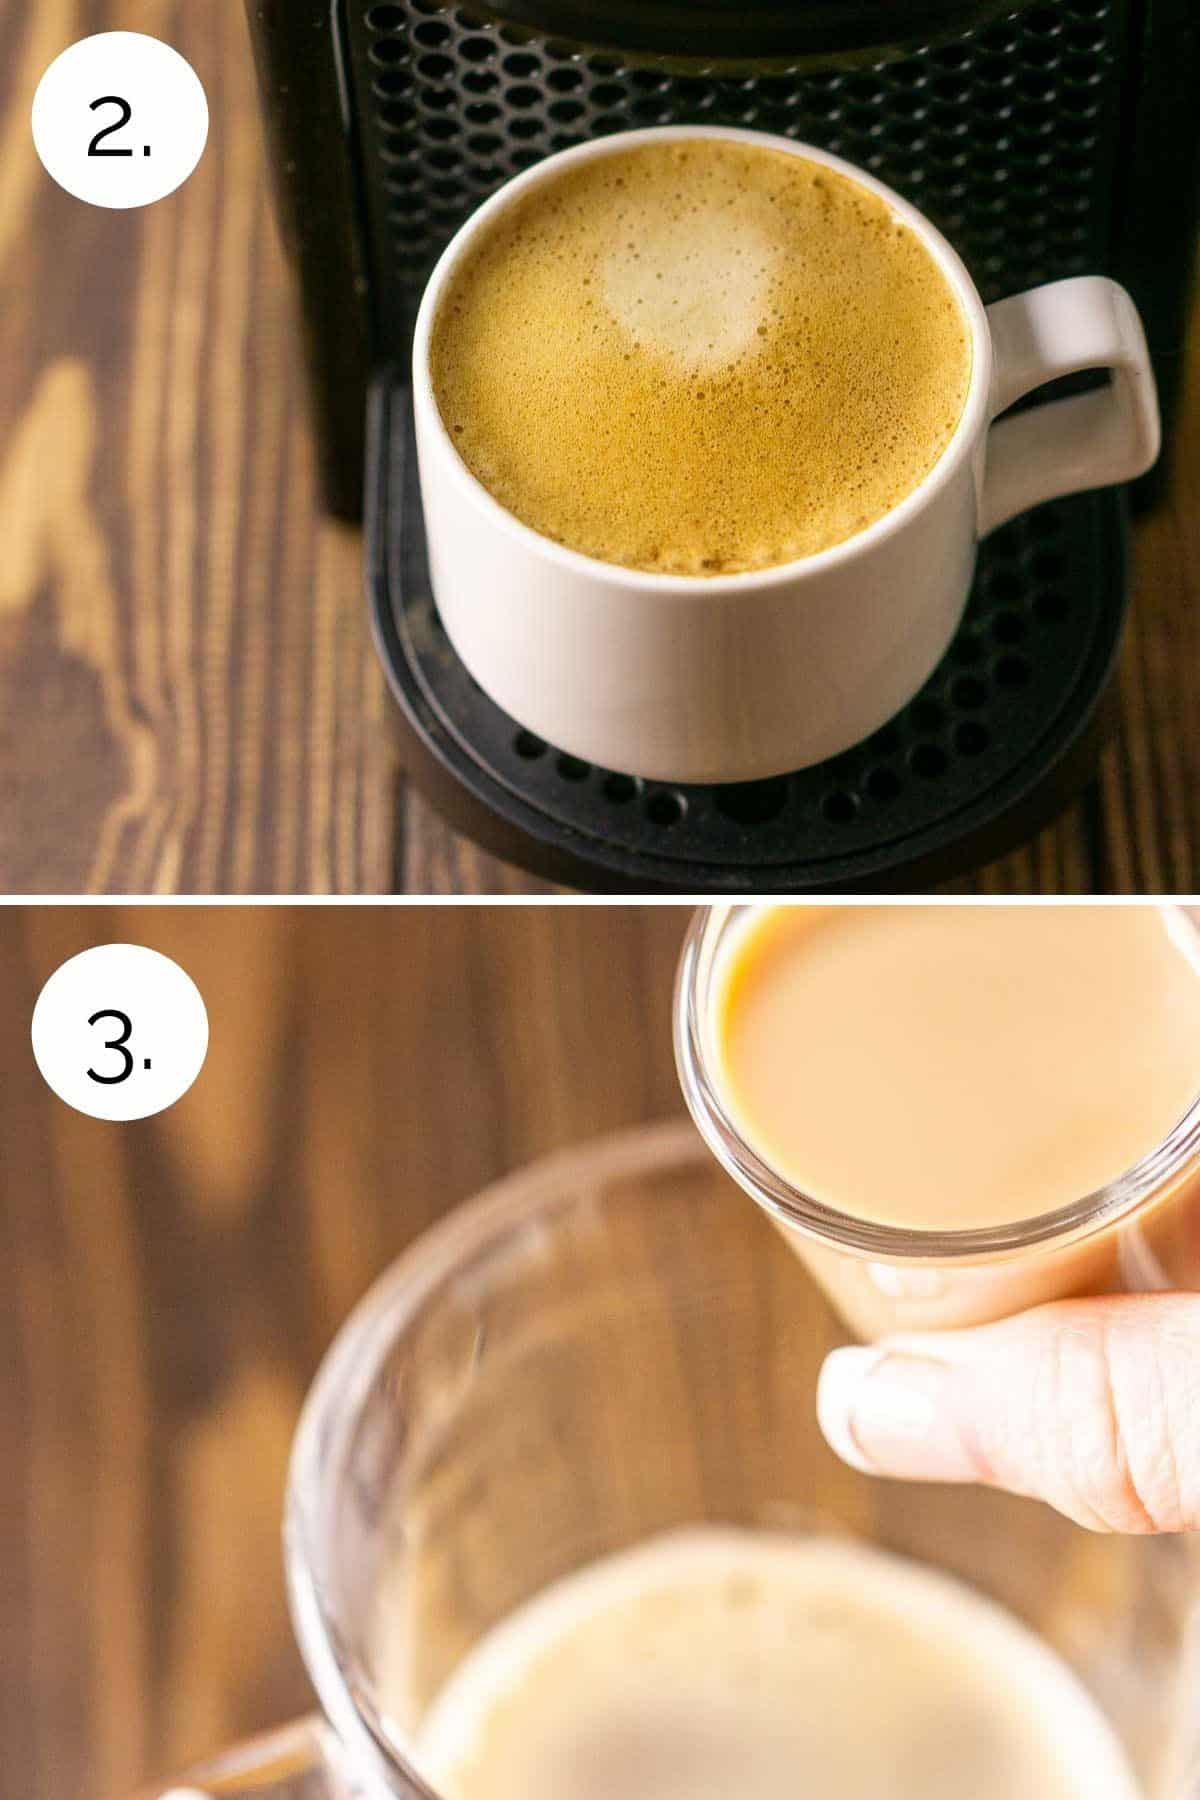 A collage showing the process of making the espresso and adding the Baileys to a mug.